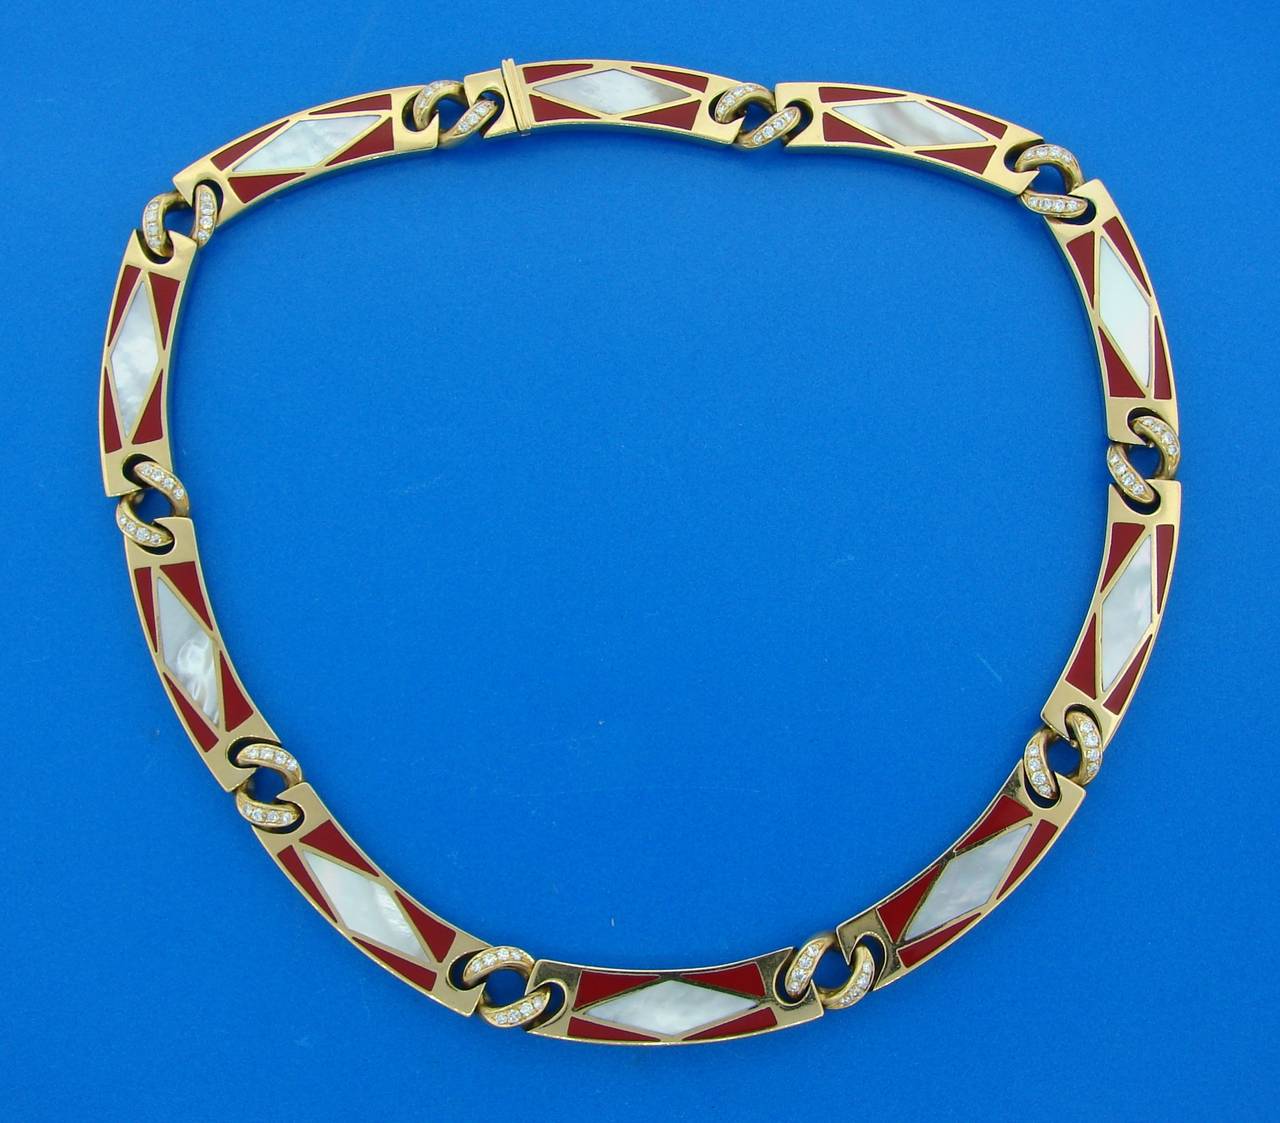 Rare necklace created by Bulgari in the 1970s. Features ten solid 18k yellow gold links inlaid with mother-of-pearl and red enamel. This links are connected with yellow gold and diamond links. 
Beautiful, colorful and very elegant. 
The necklace